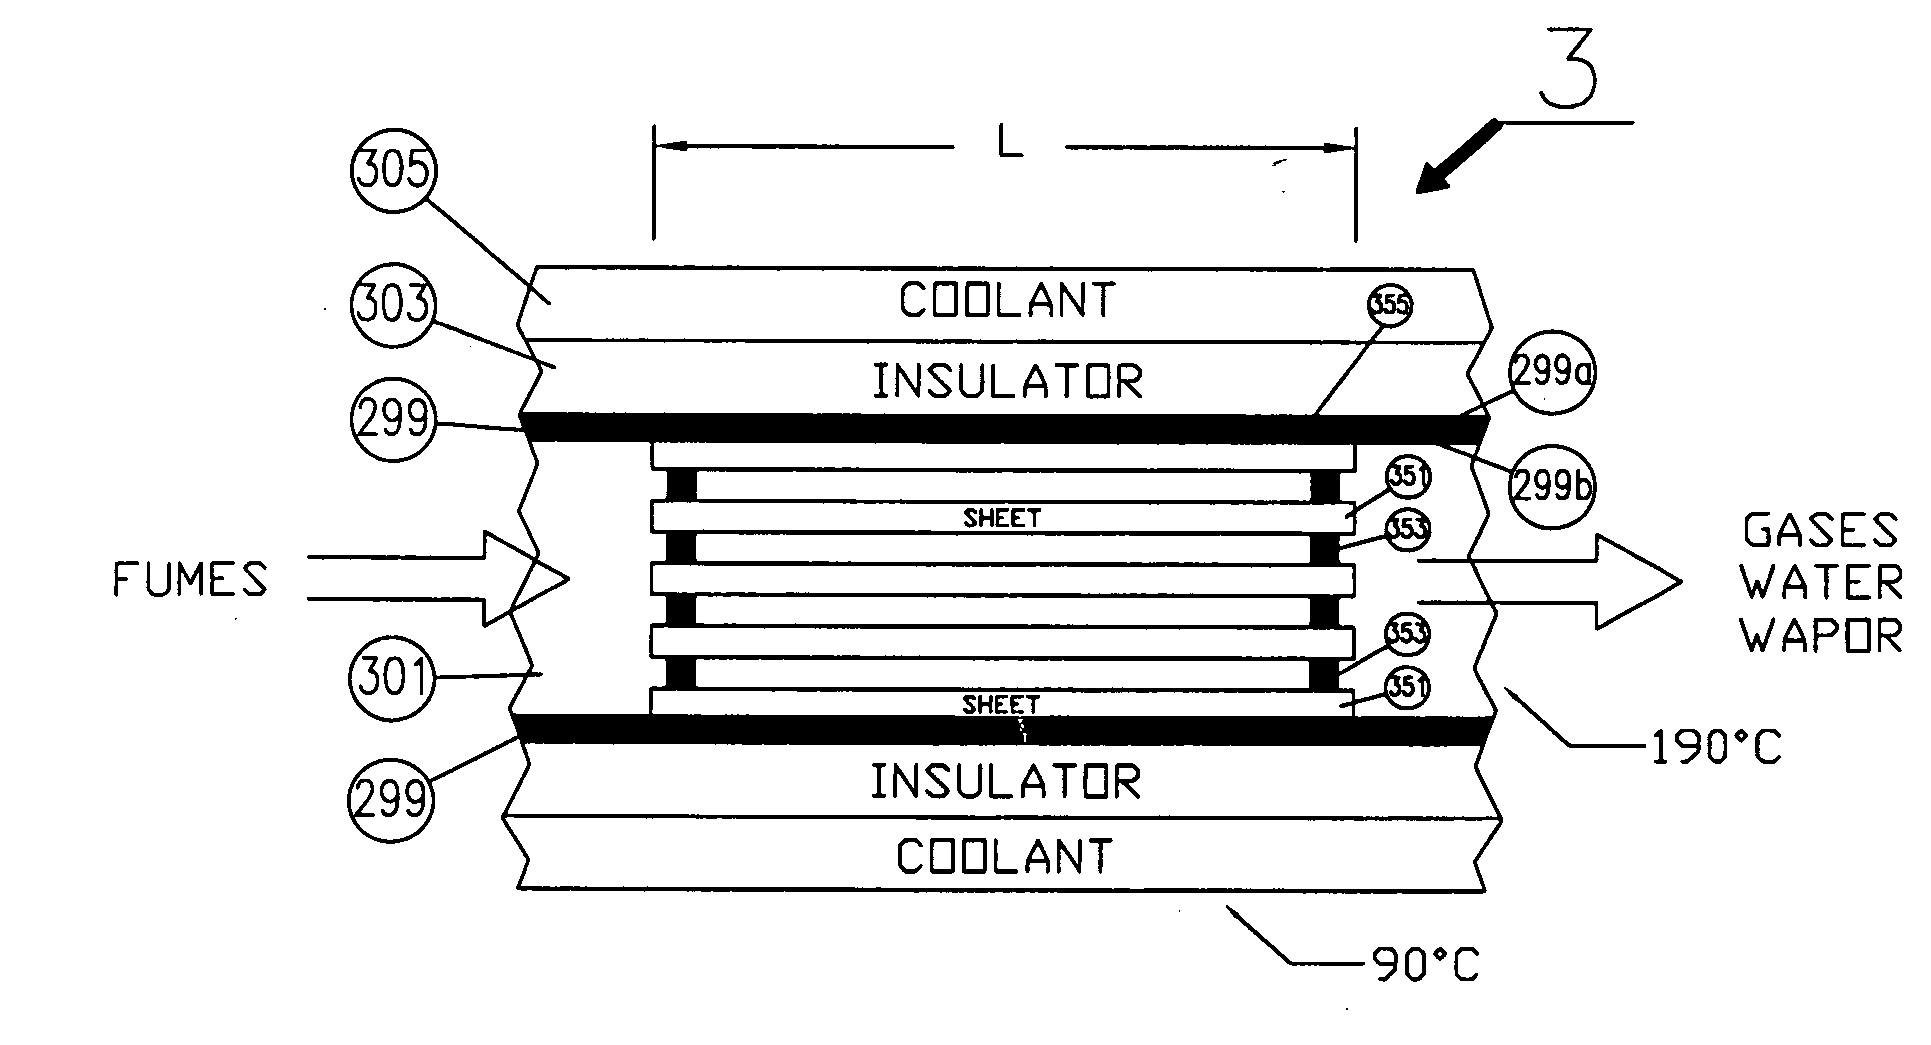 Explosion protection system with integrated emission control device